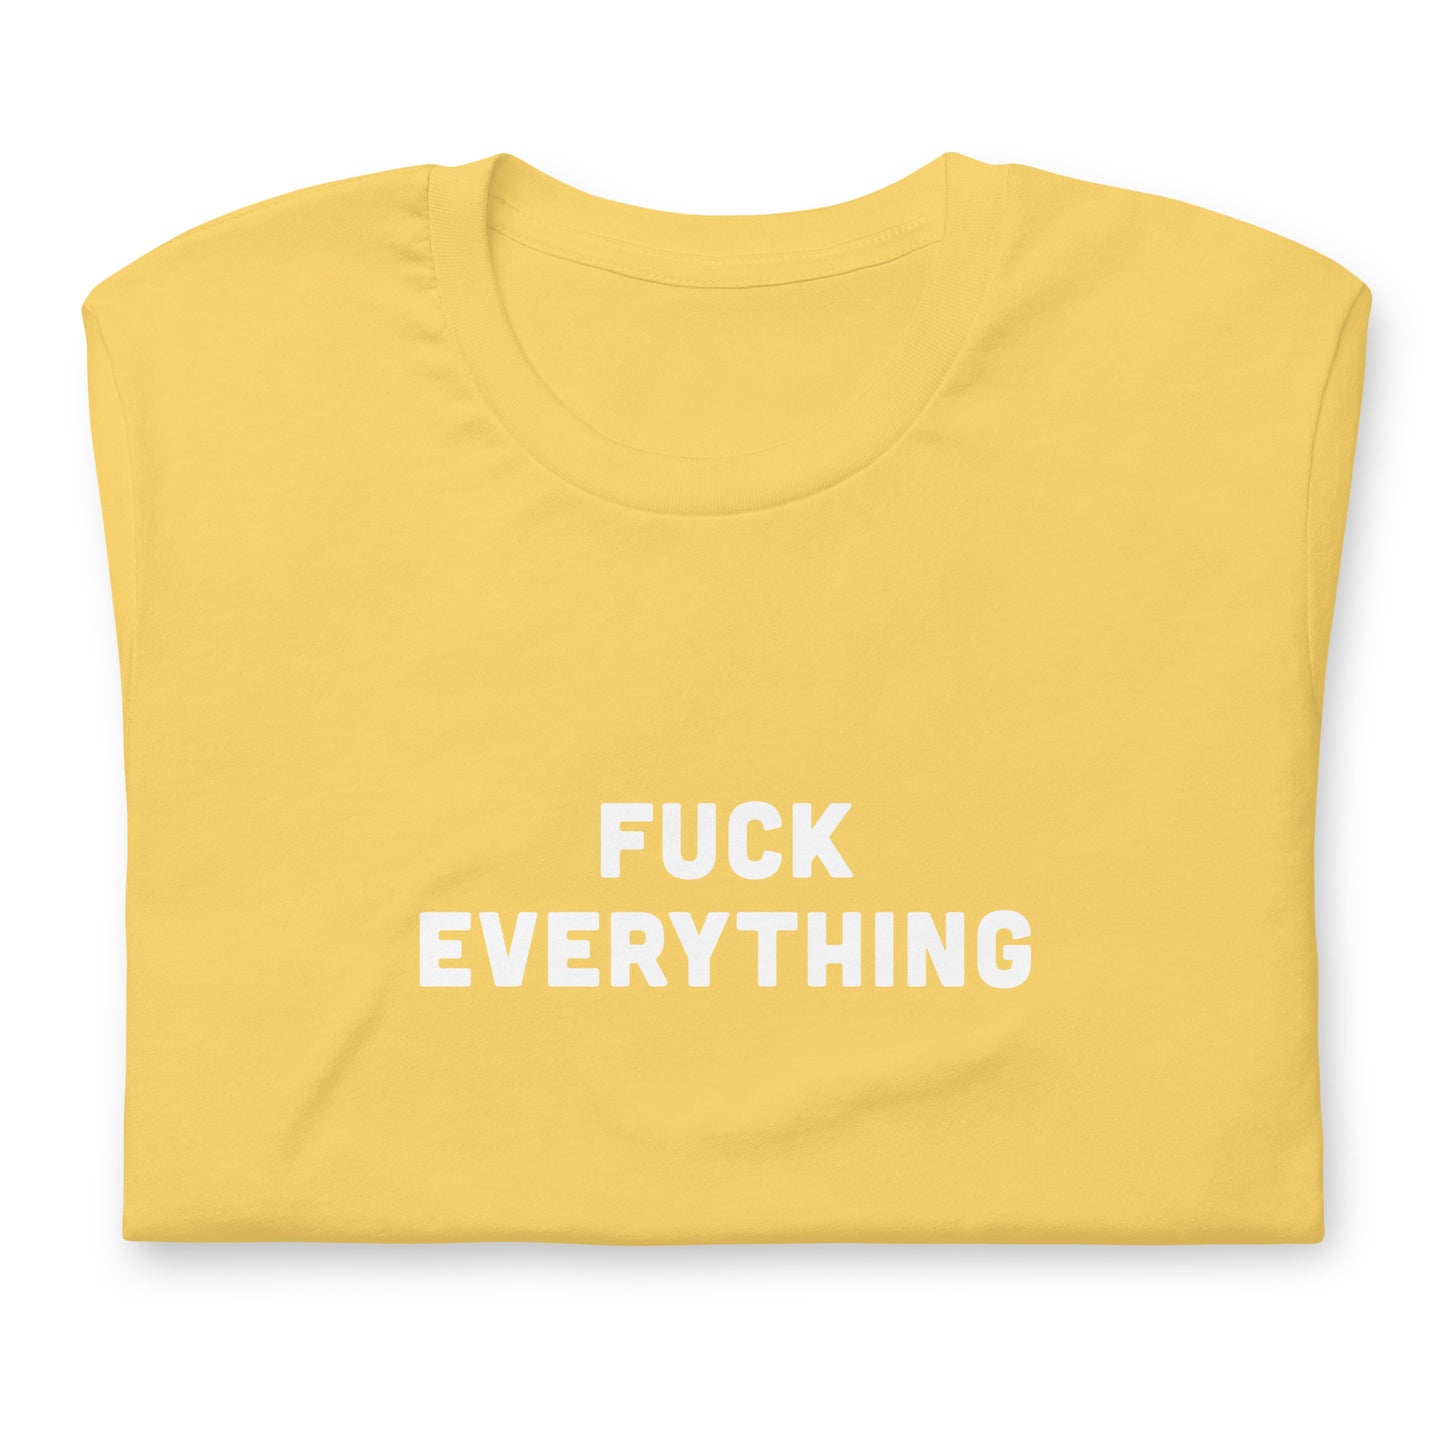 Fuck Everything t-shirt Size S Color Black